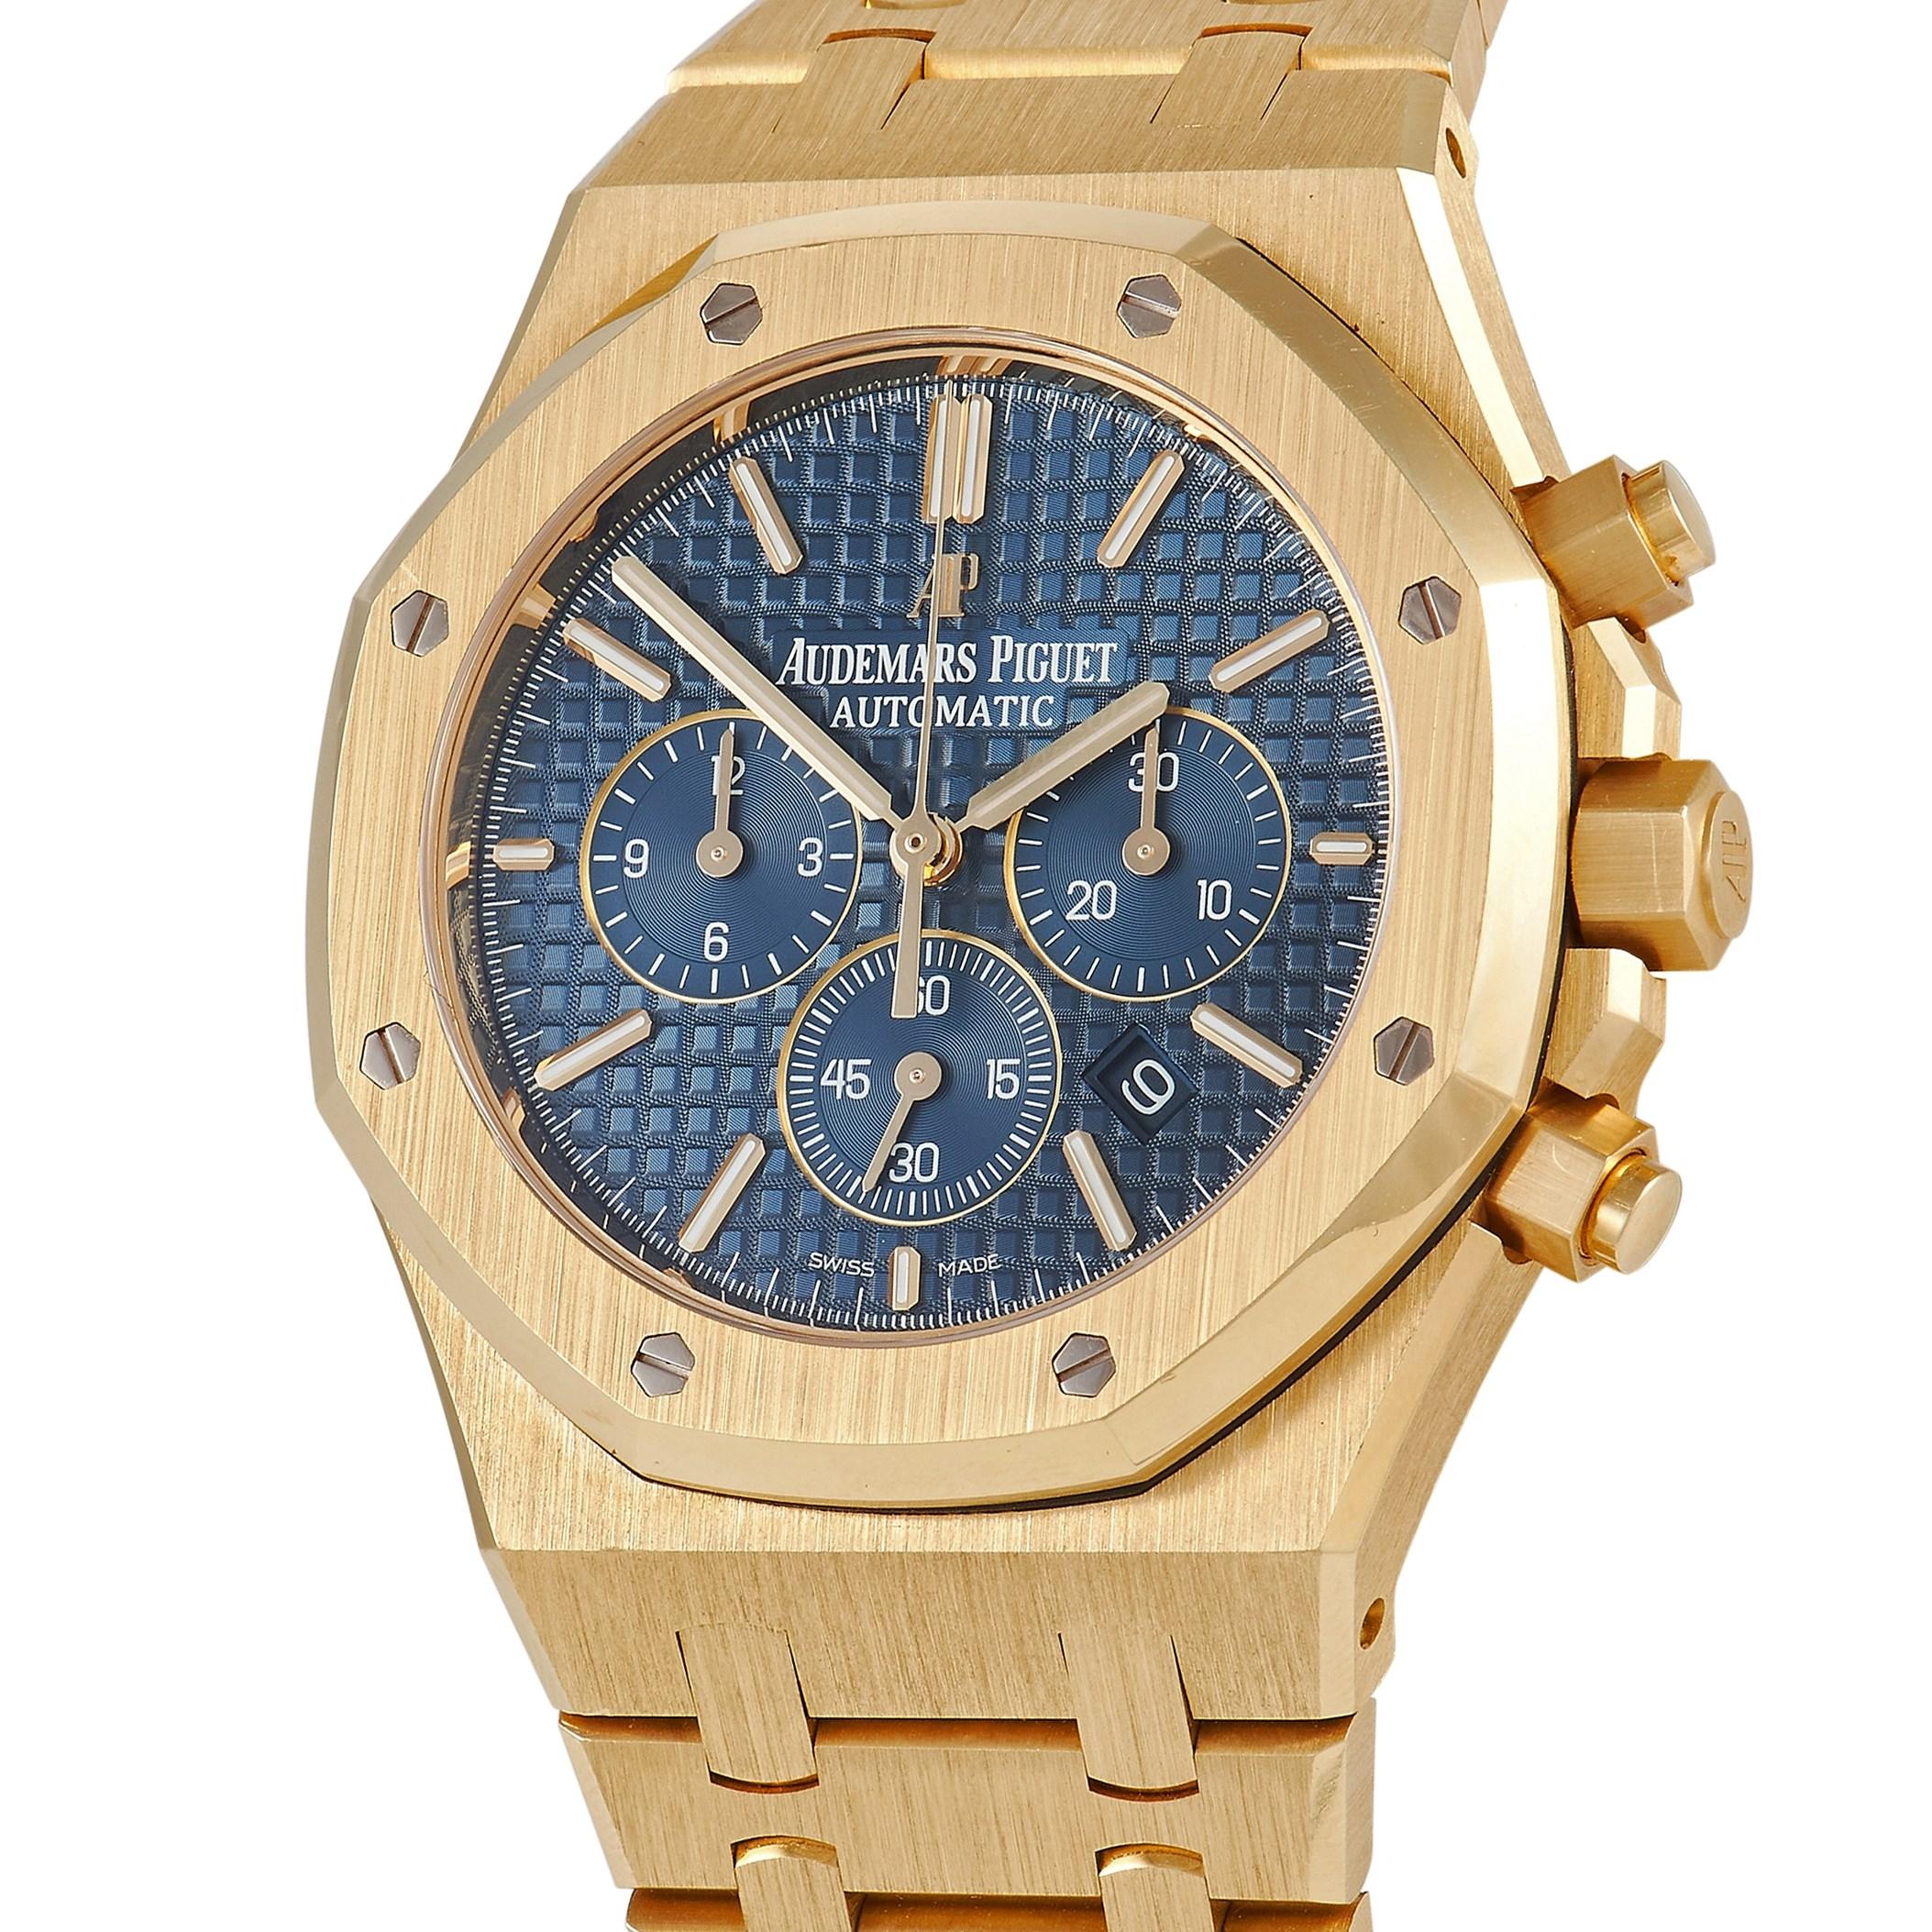 Clad in 18K yellow gold, the stand-out Royal Oak 26320BA.OO.1220BA.02 bears the archetypal ‘Grande Tapisserie’ dial in blue. The case measures 41mm and features a brushed finish. It has a yellow gold octagonal bezel with eight hexagonal screws.